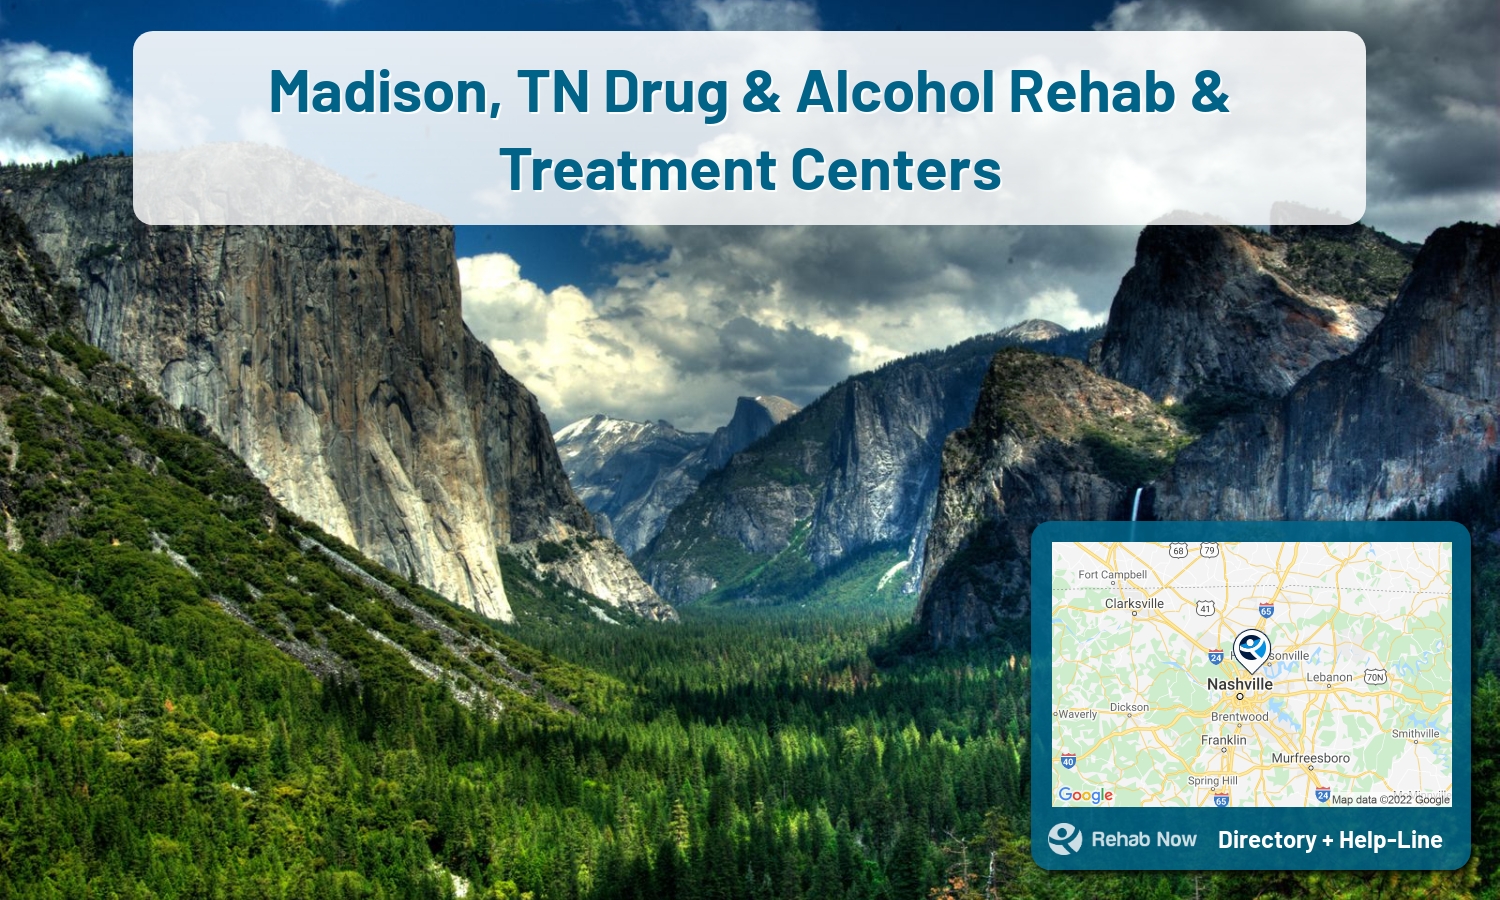 Our experts can help you find treatment now in Madison, Tennessee. We list drug rehab and alcohol centers in Tennessee.